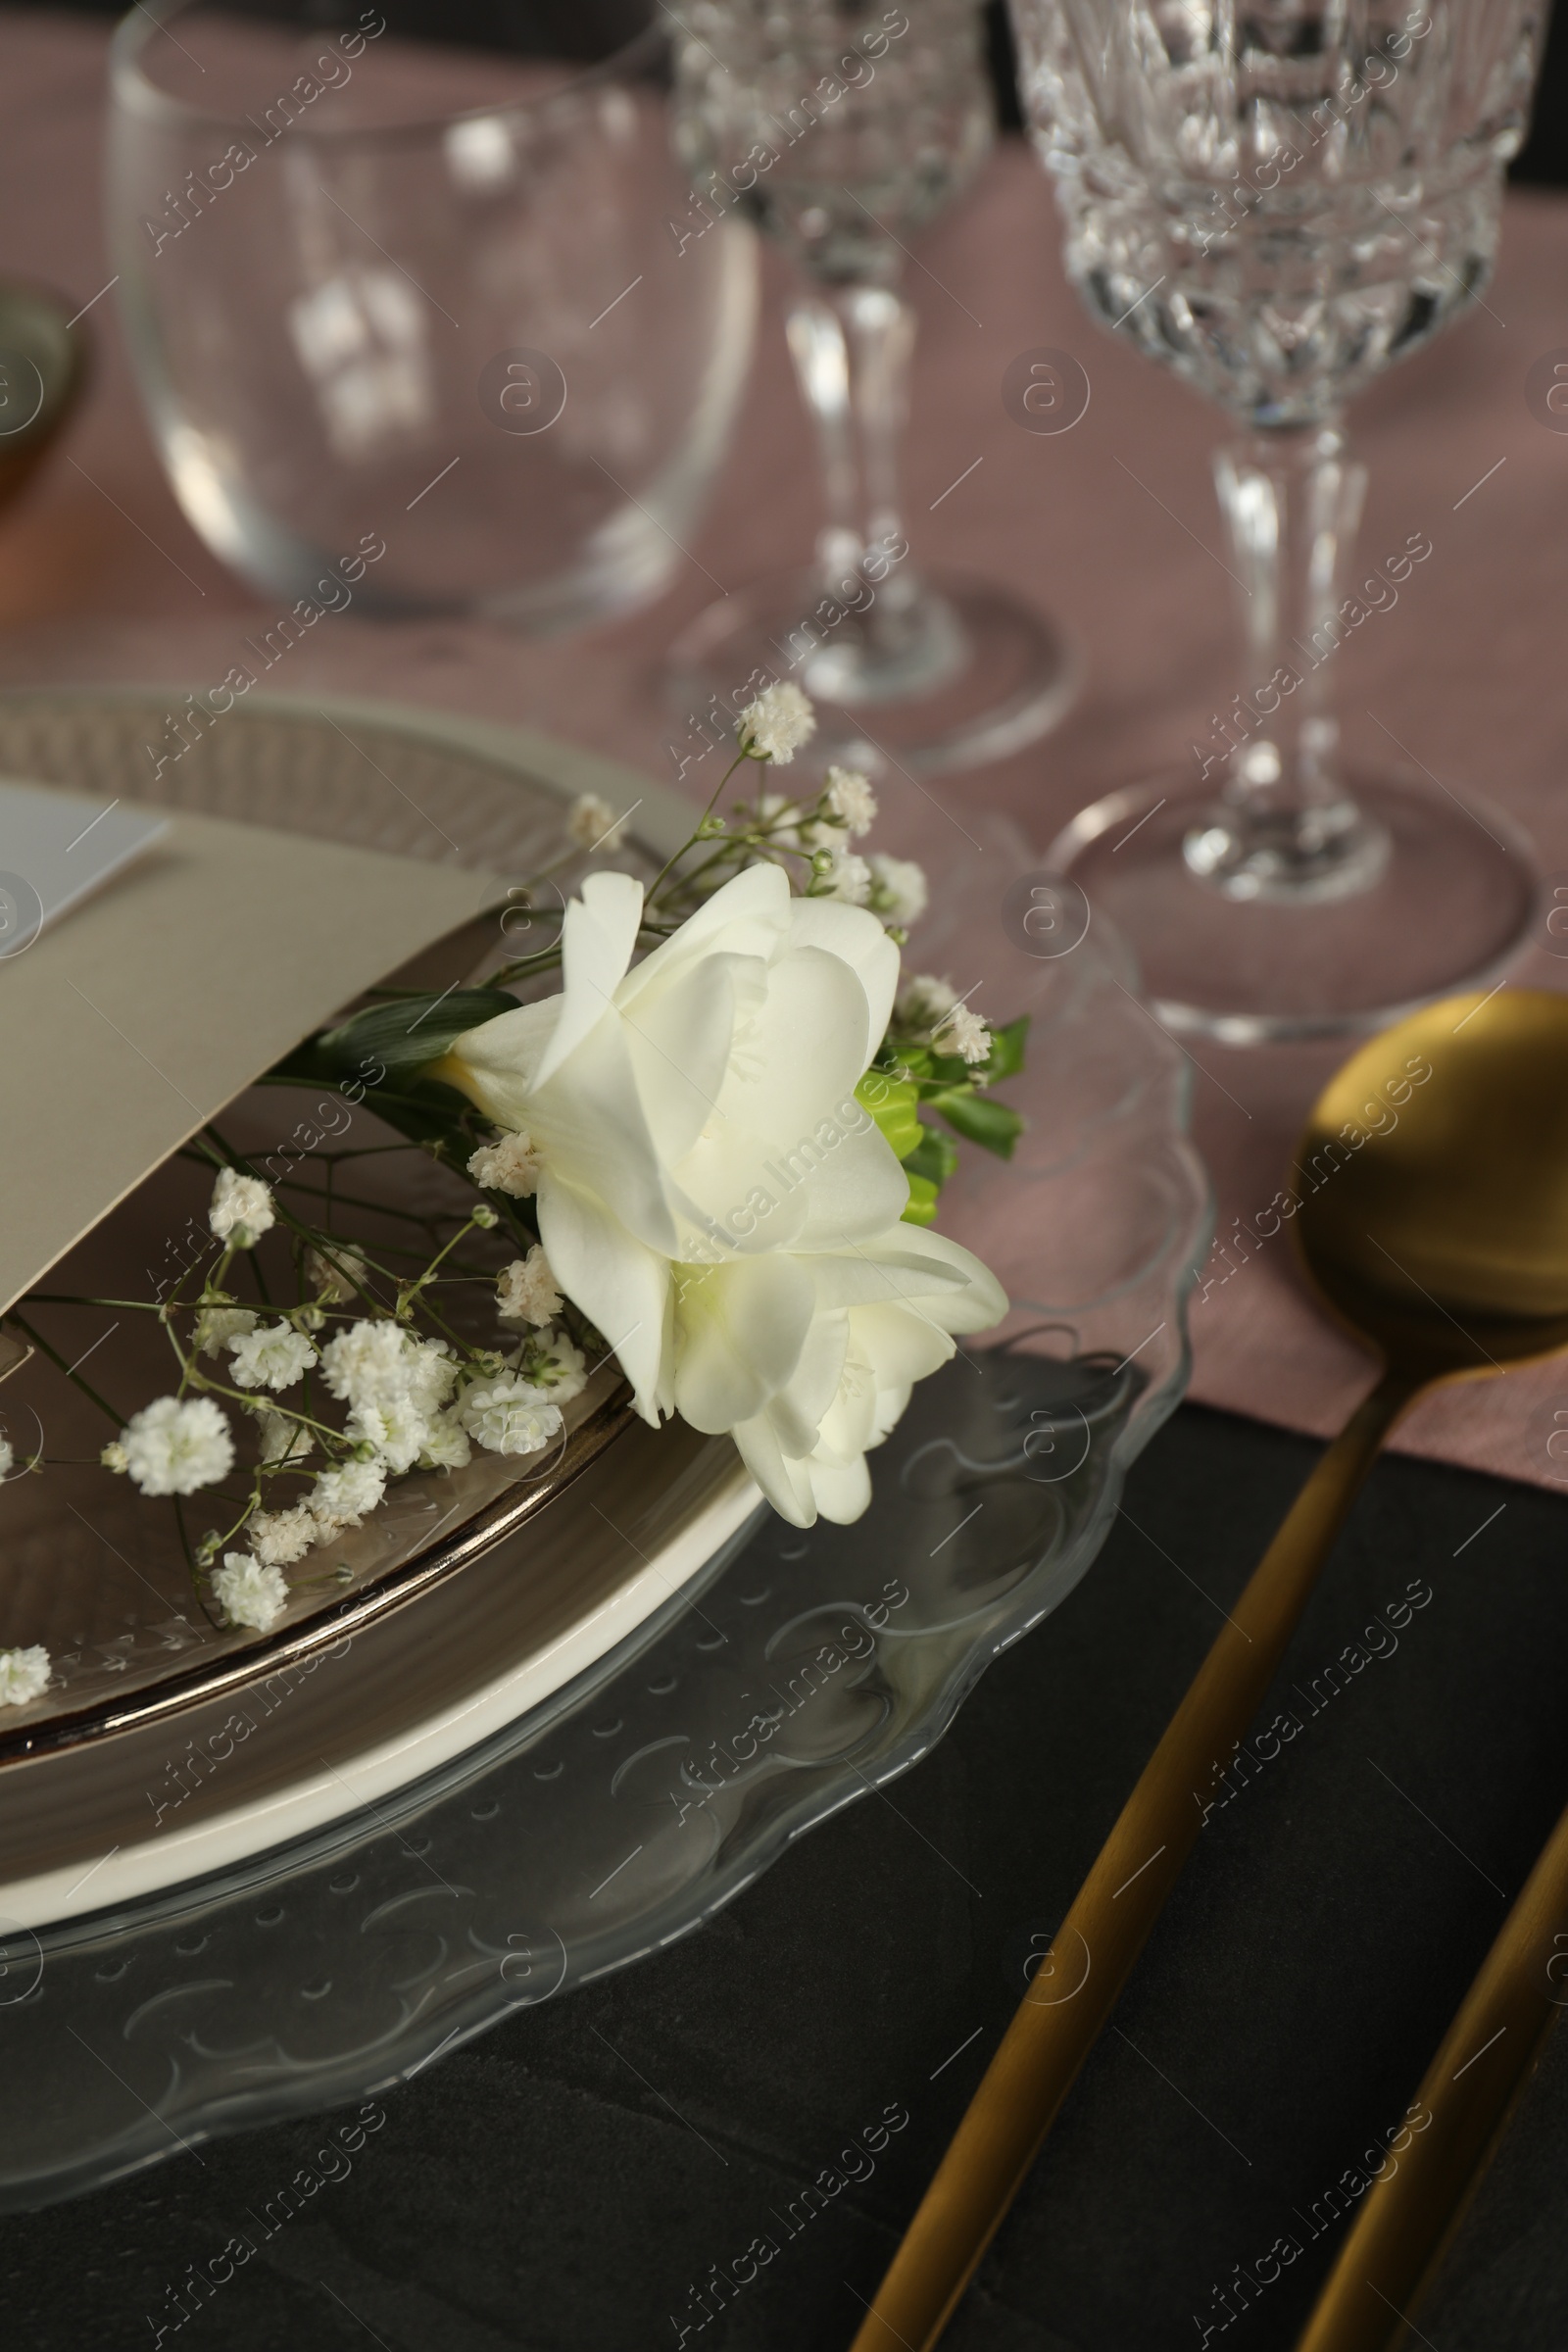 Photo of Stylish table setting with floral decor on black surface